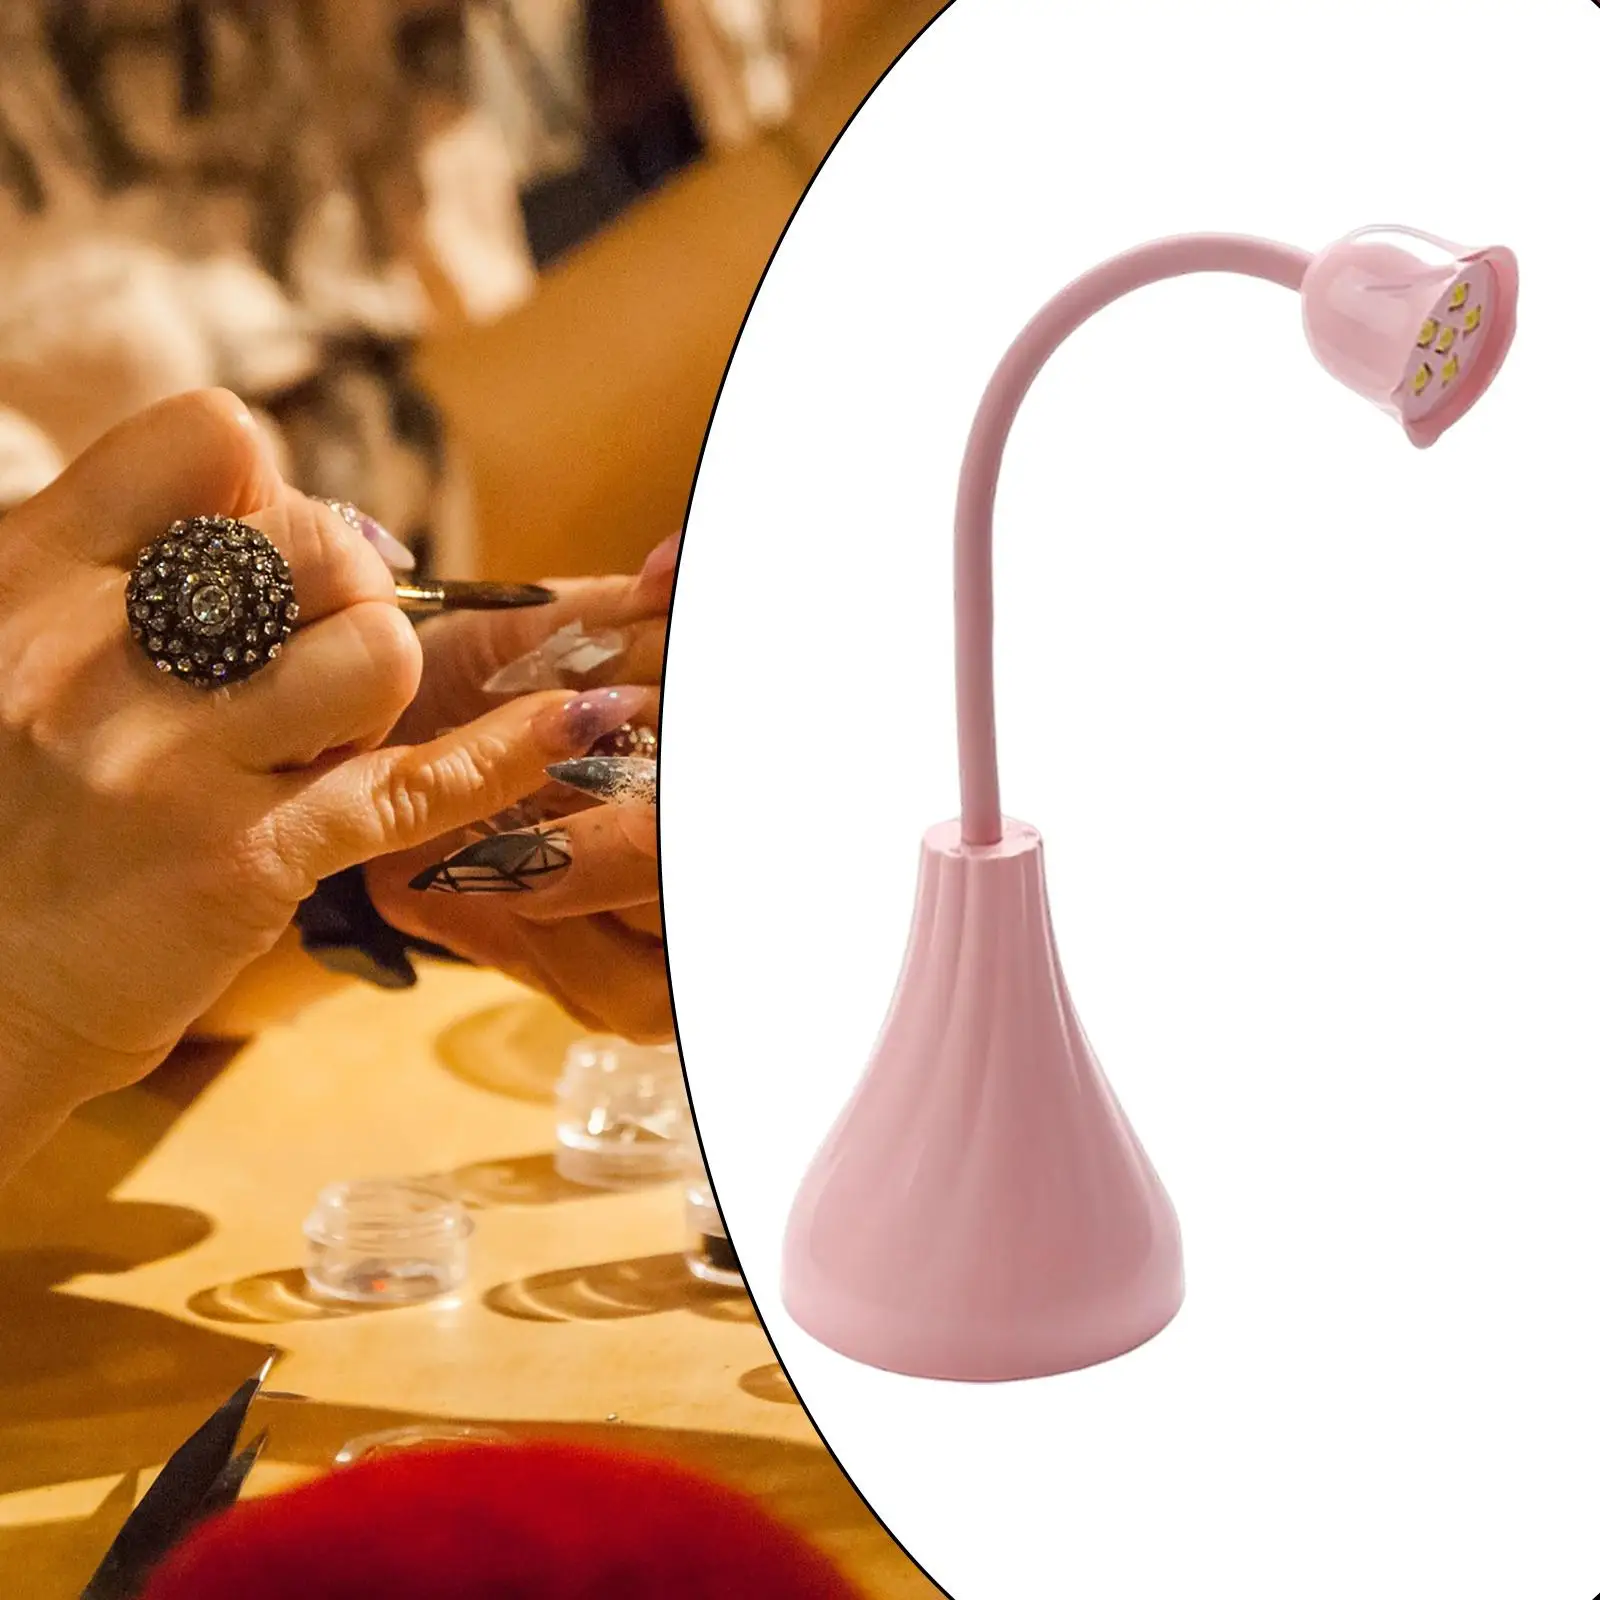 Nail Lamp Faster Curing Machine Nail Art Tools Nail Patch Toaster Lamp Curing Gel 360 Rotation Lightweight for Gel Nails Home